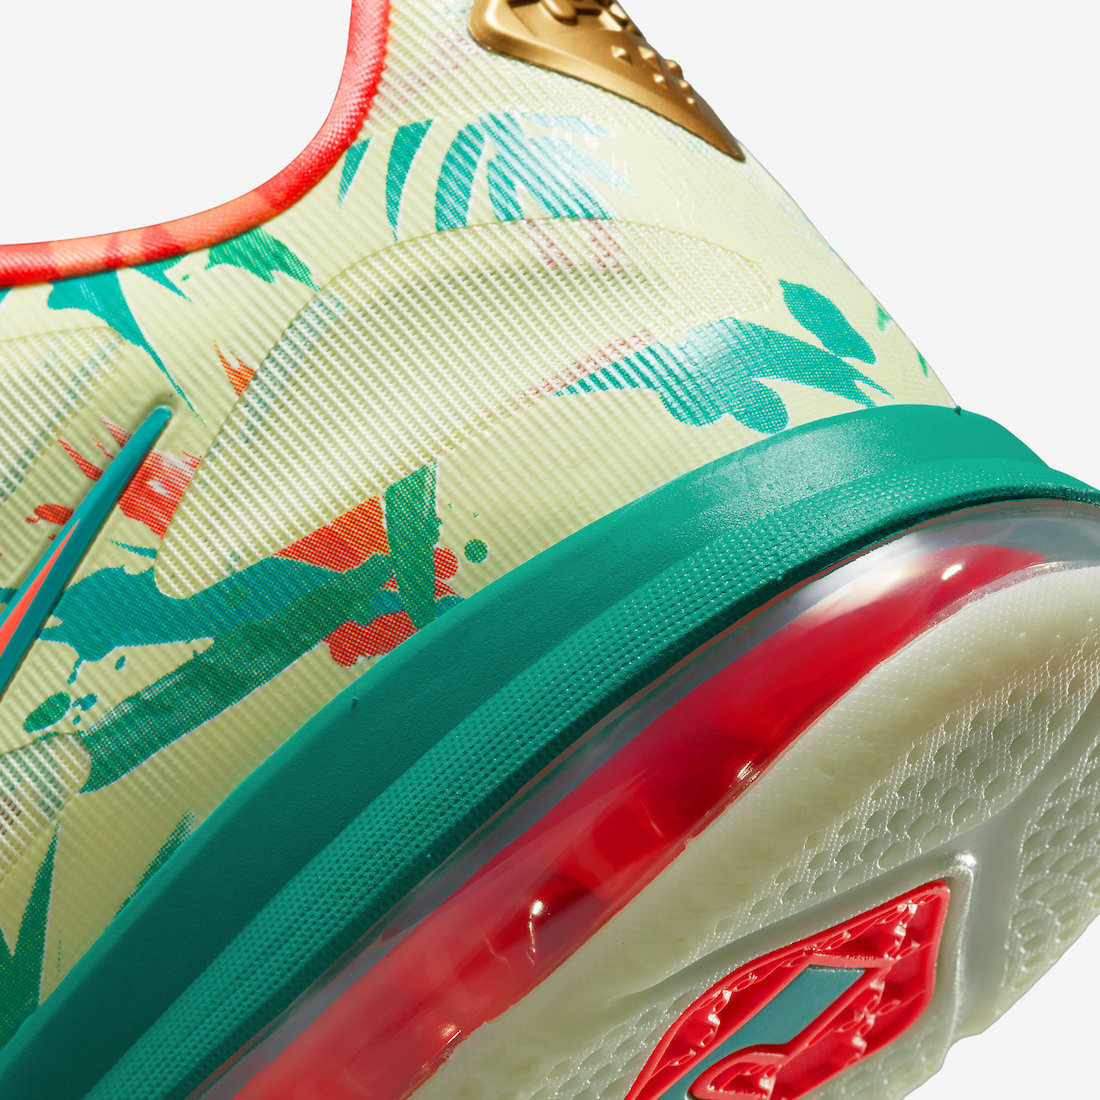 Nike-LeBron-9-Low-LeBronold-Palmer-DO9355-300-Release-Date-7